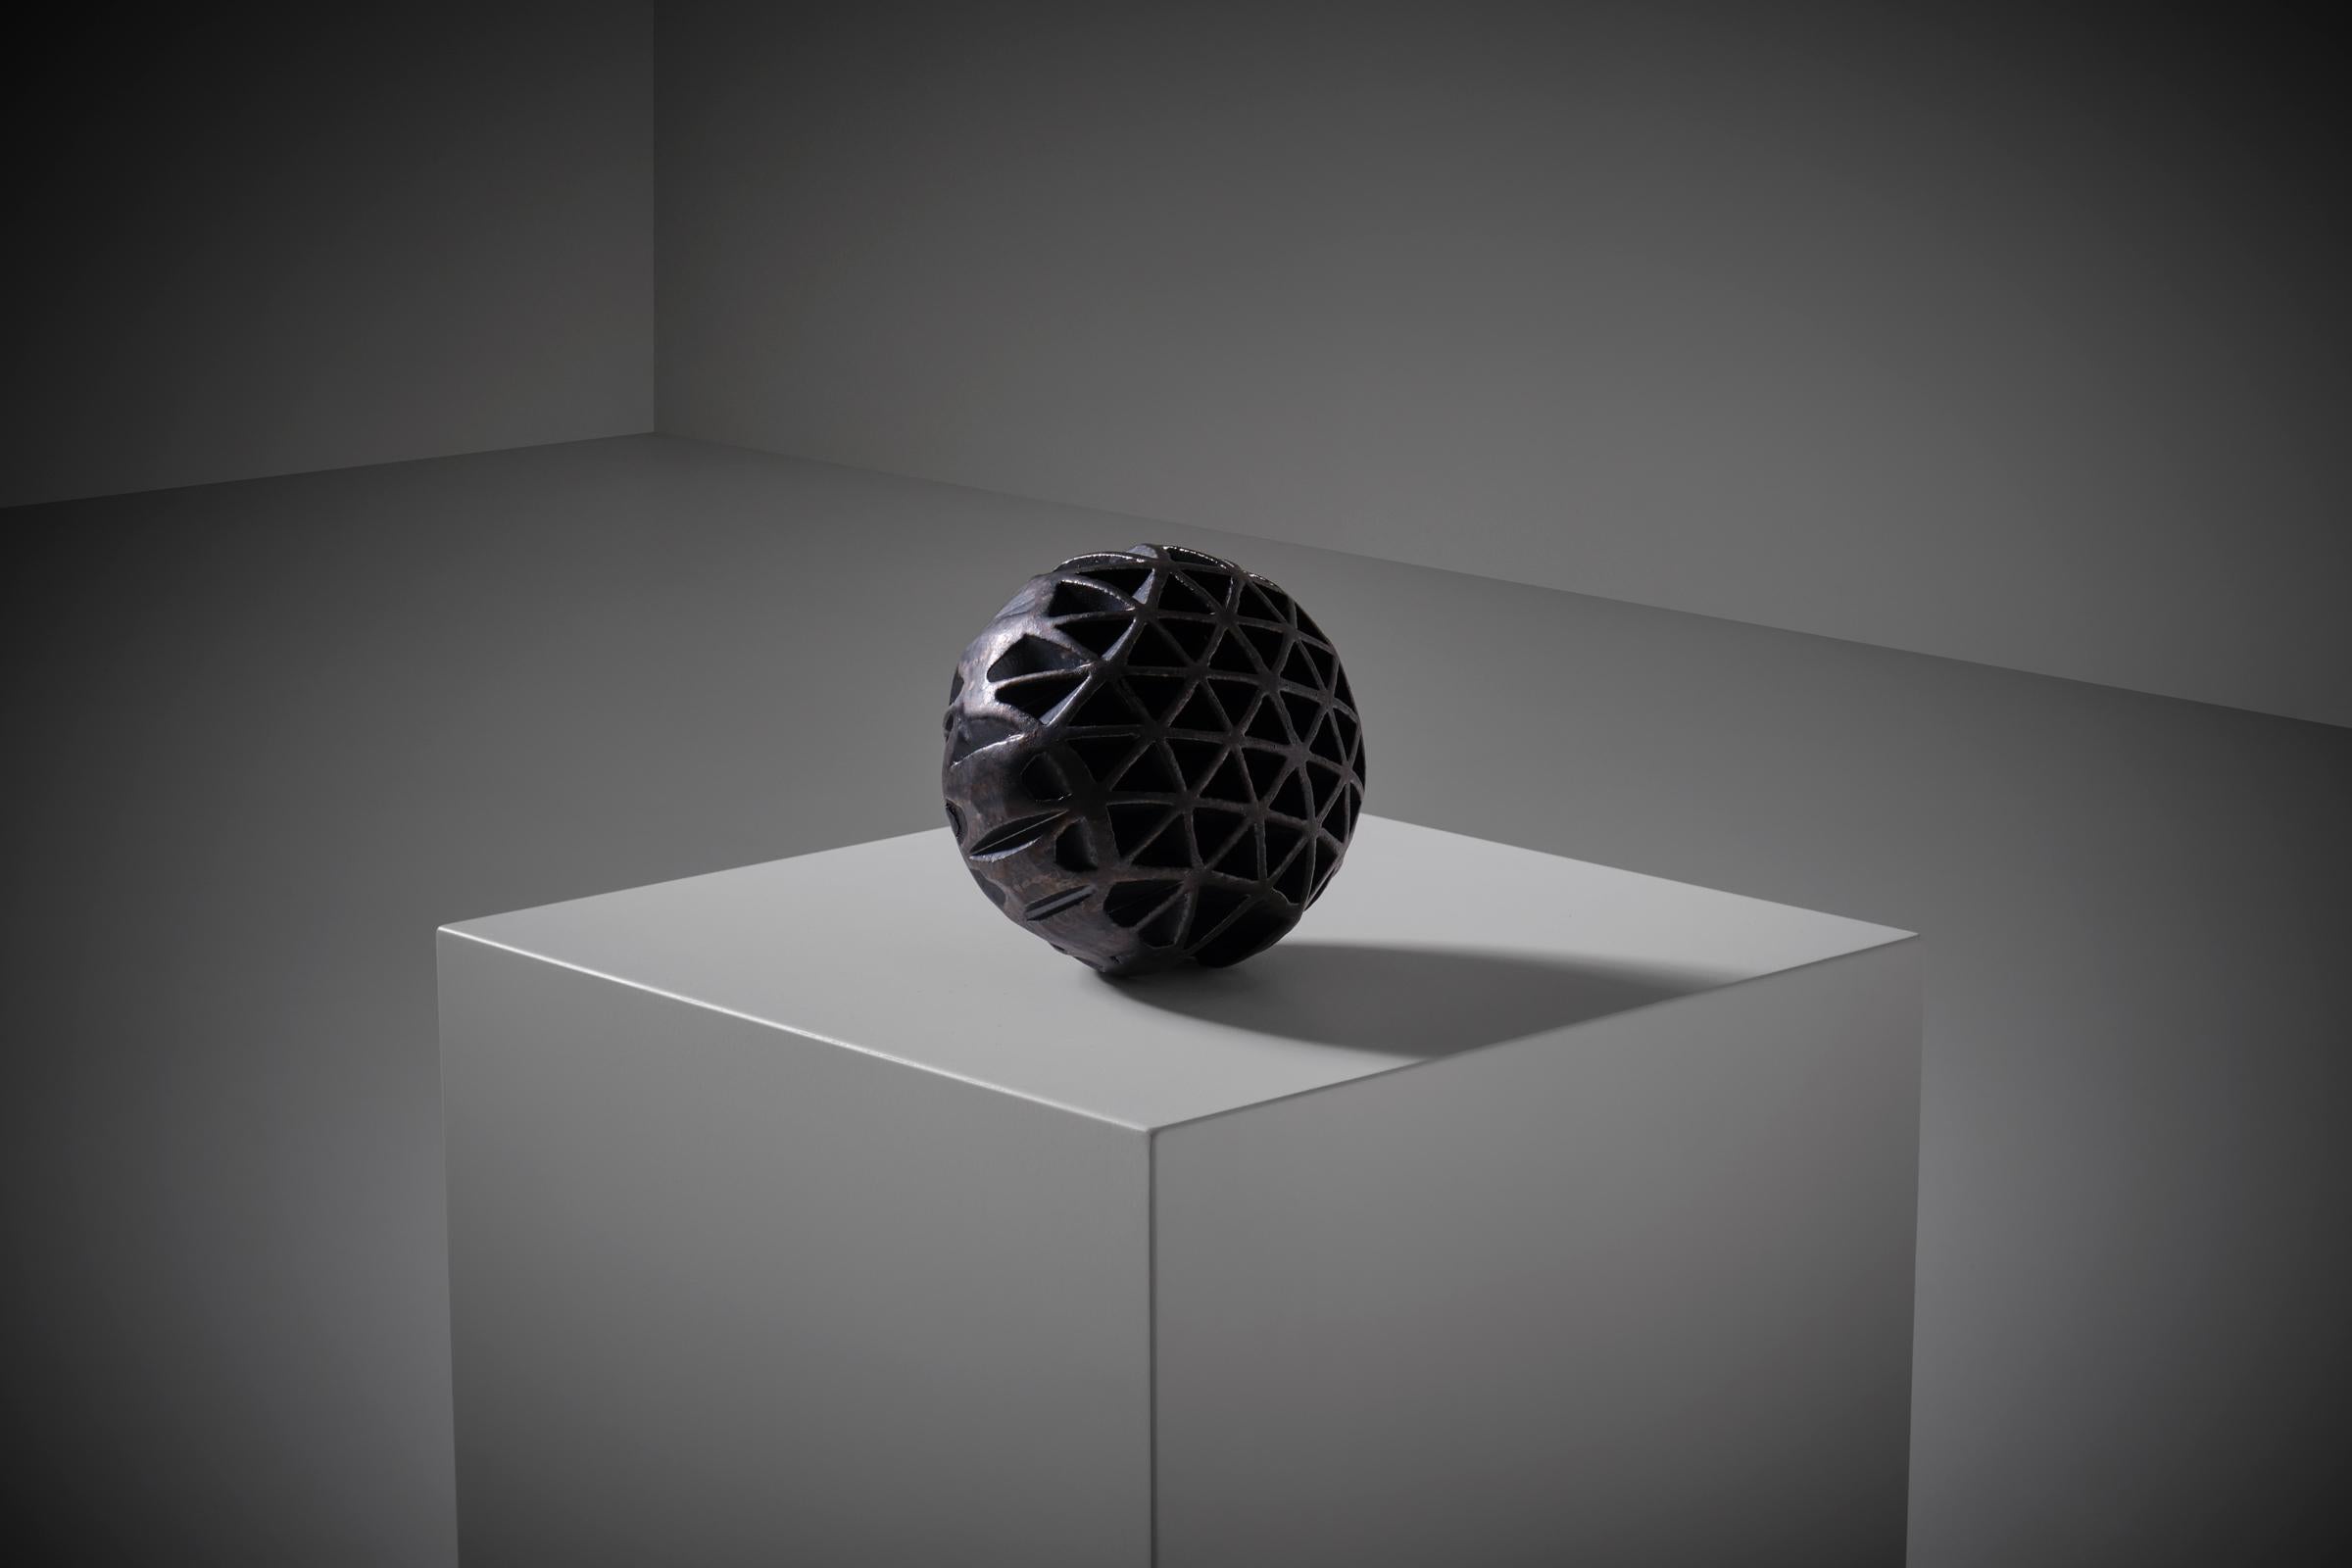 Exceptional anthracite metallic enameled sphere sculpture by Alessio Tasca, Italy, circa 1968. Interesting extruded sphere shape with a beautiful and exceptional metallic anthracite and copper colored enamel finish which gives the idea of metal. The